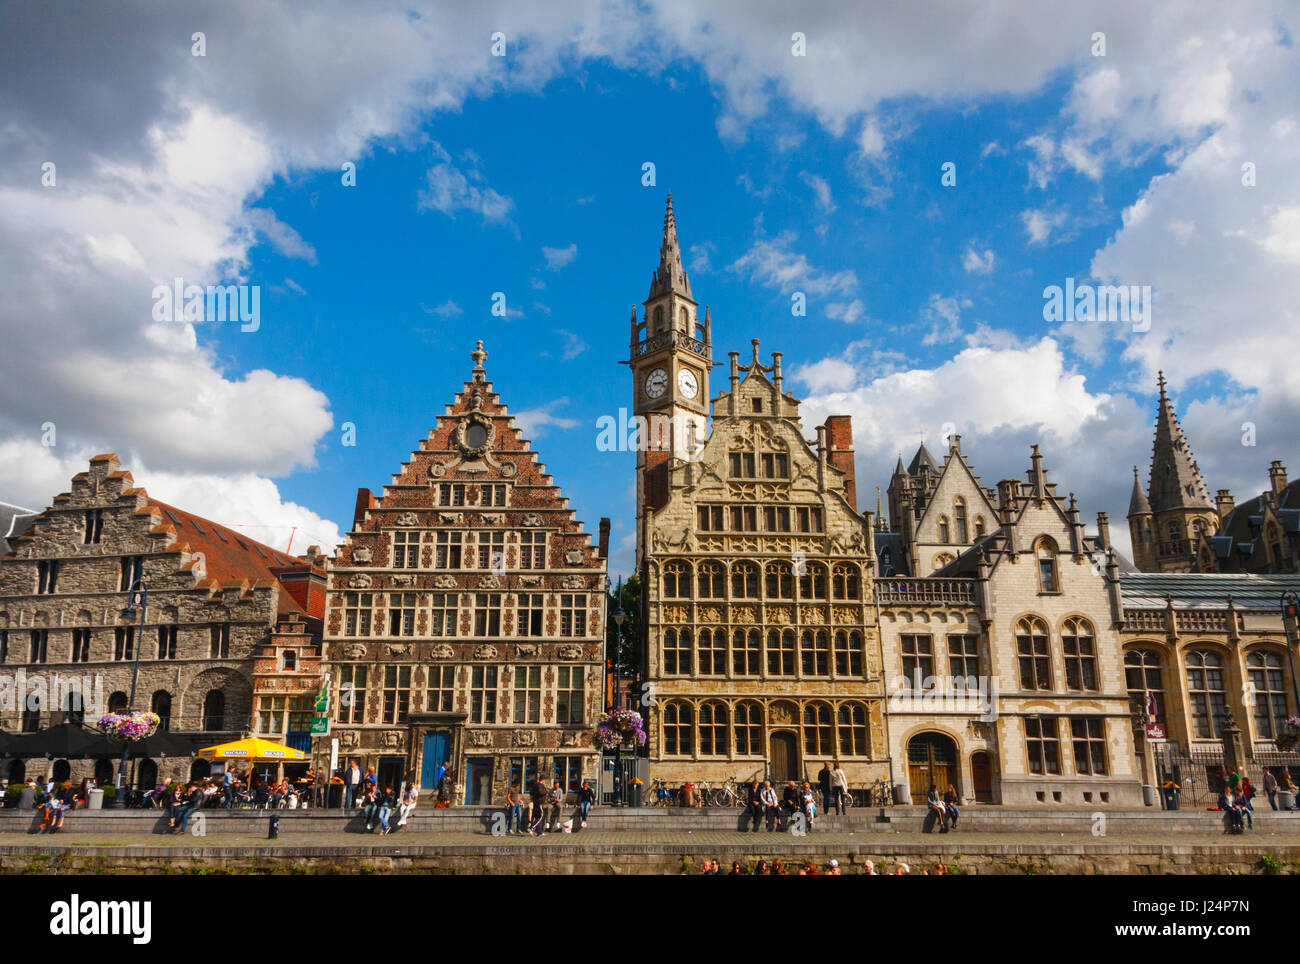 View of Graslei (Grass Quay) with medieval buildings and unidentified tourists under a blue sky with clouds. Ghent, Belgium. Stock Photo